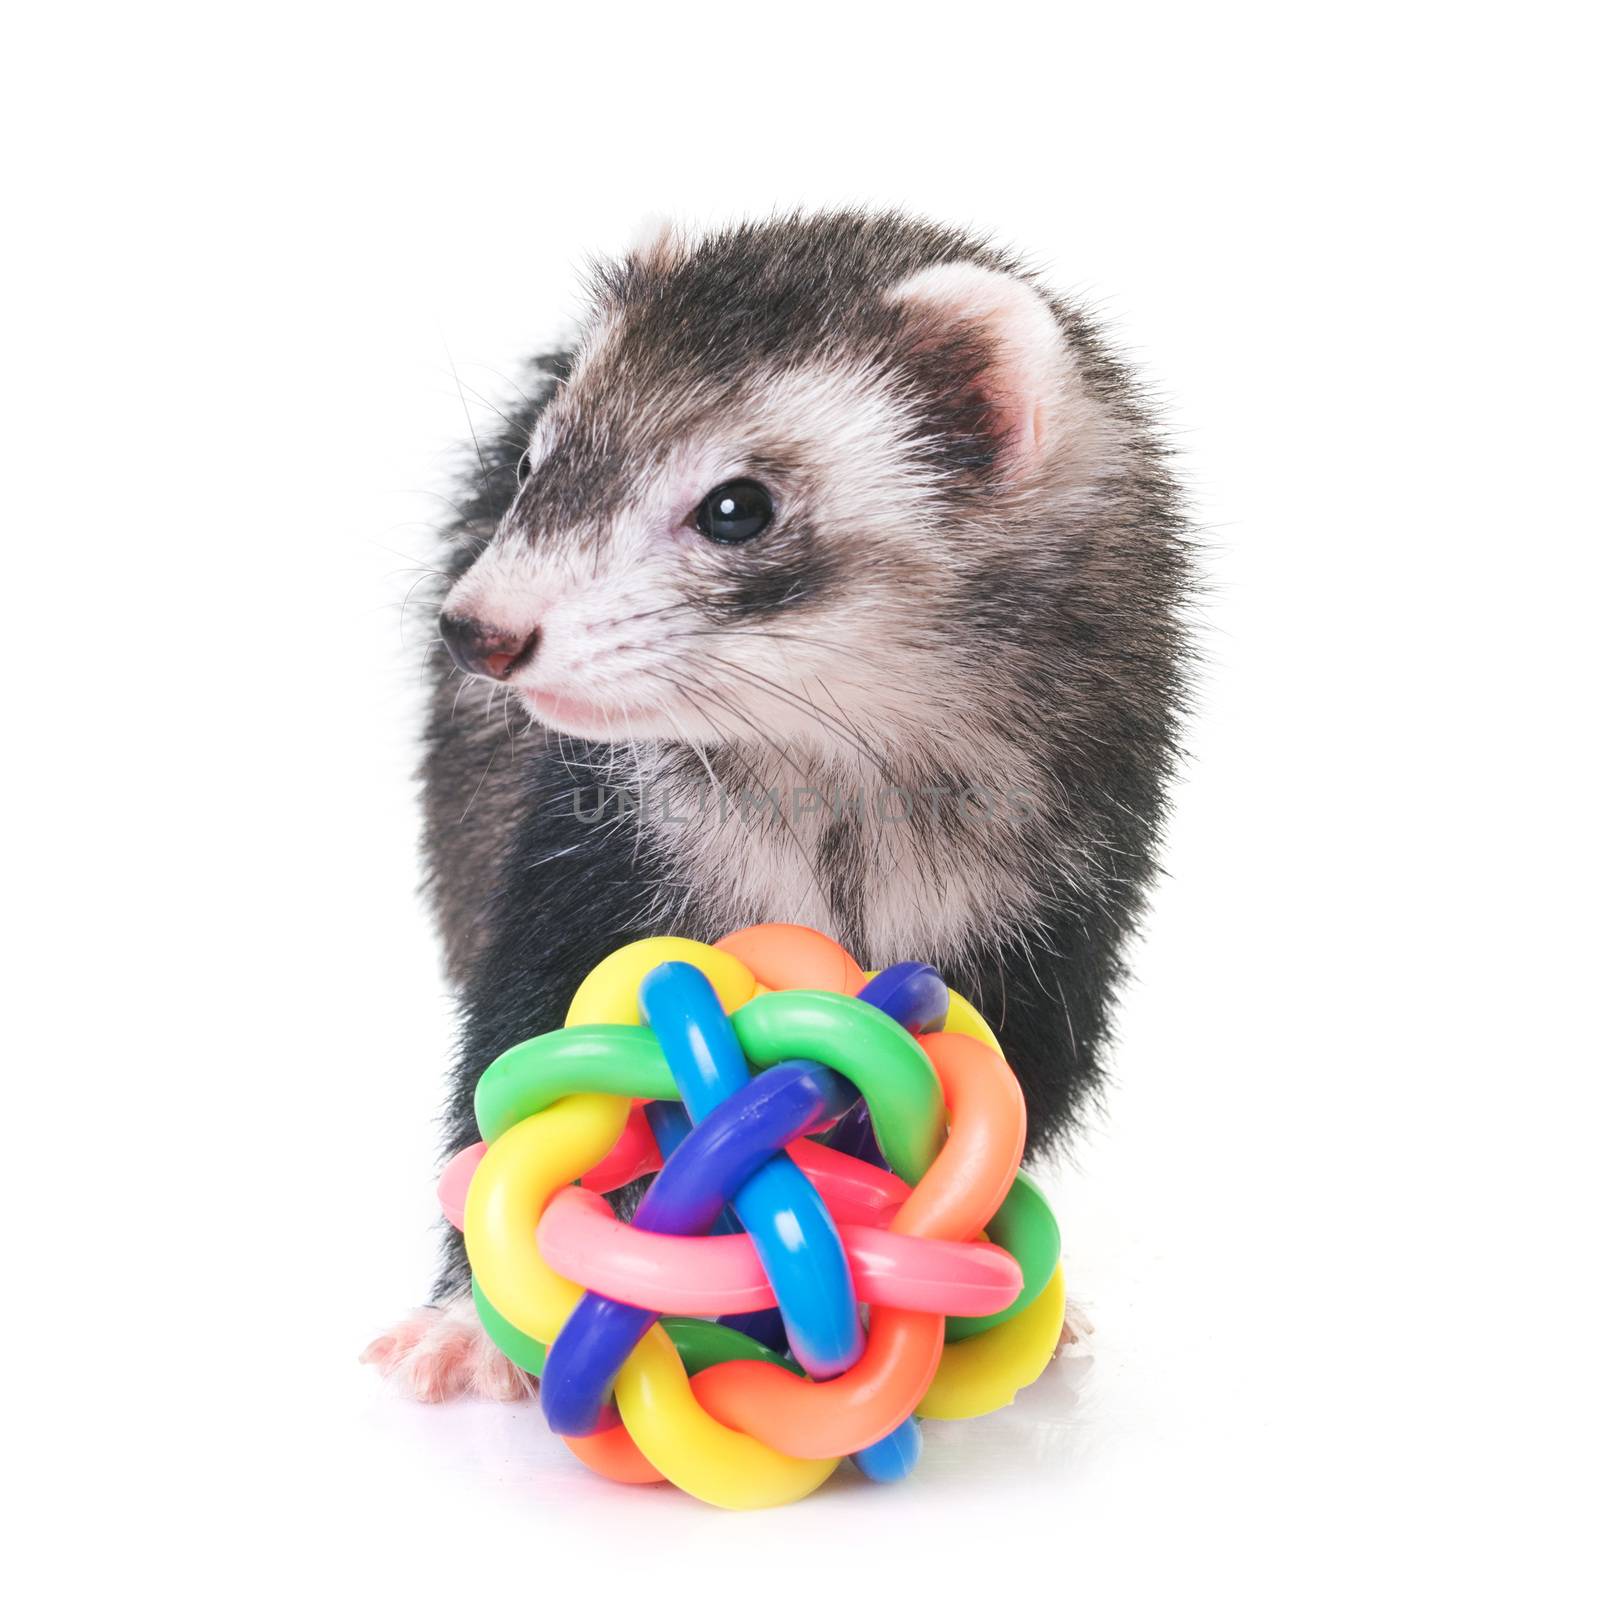 female ferret in front of white background